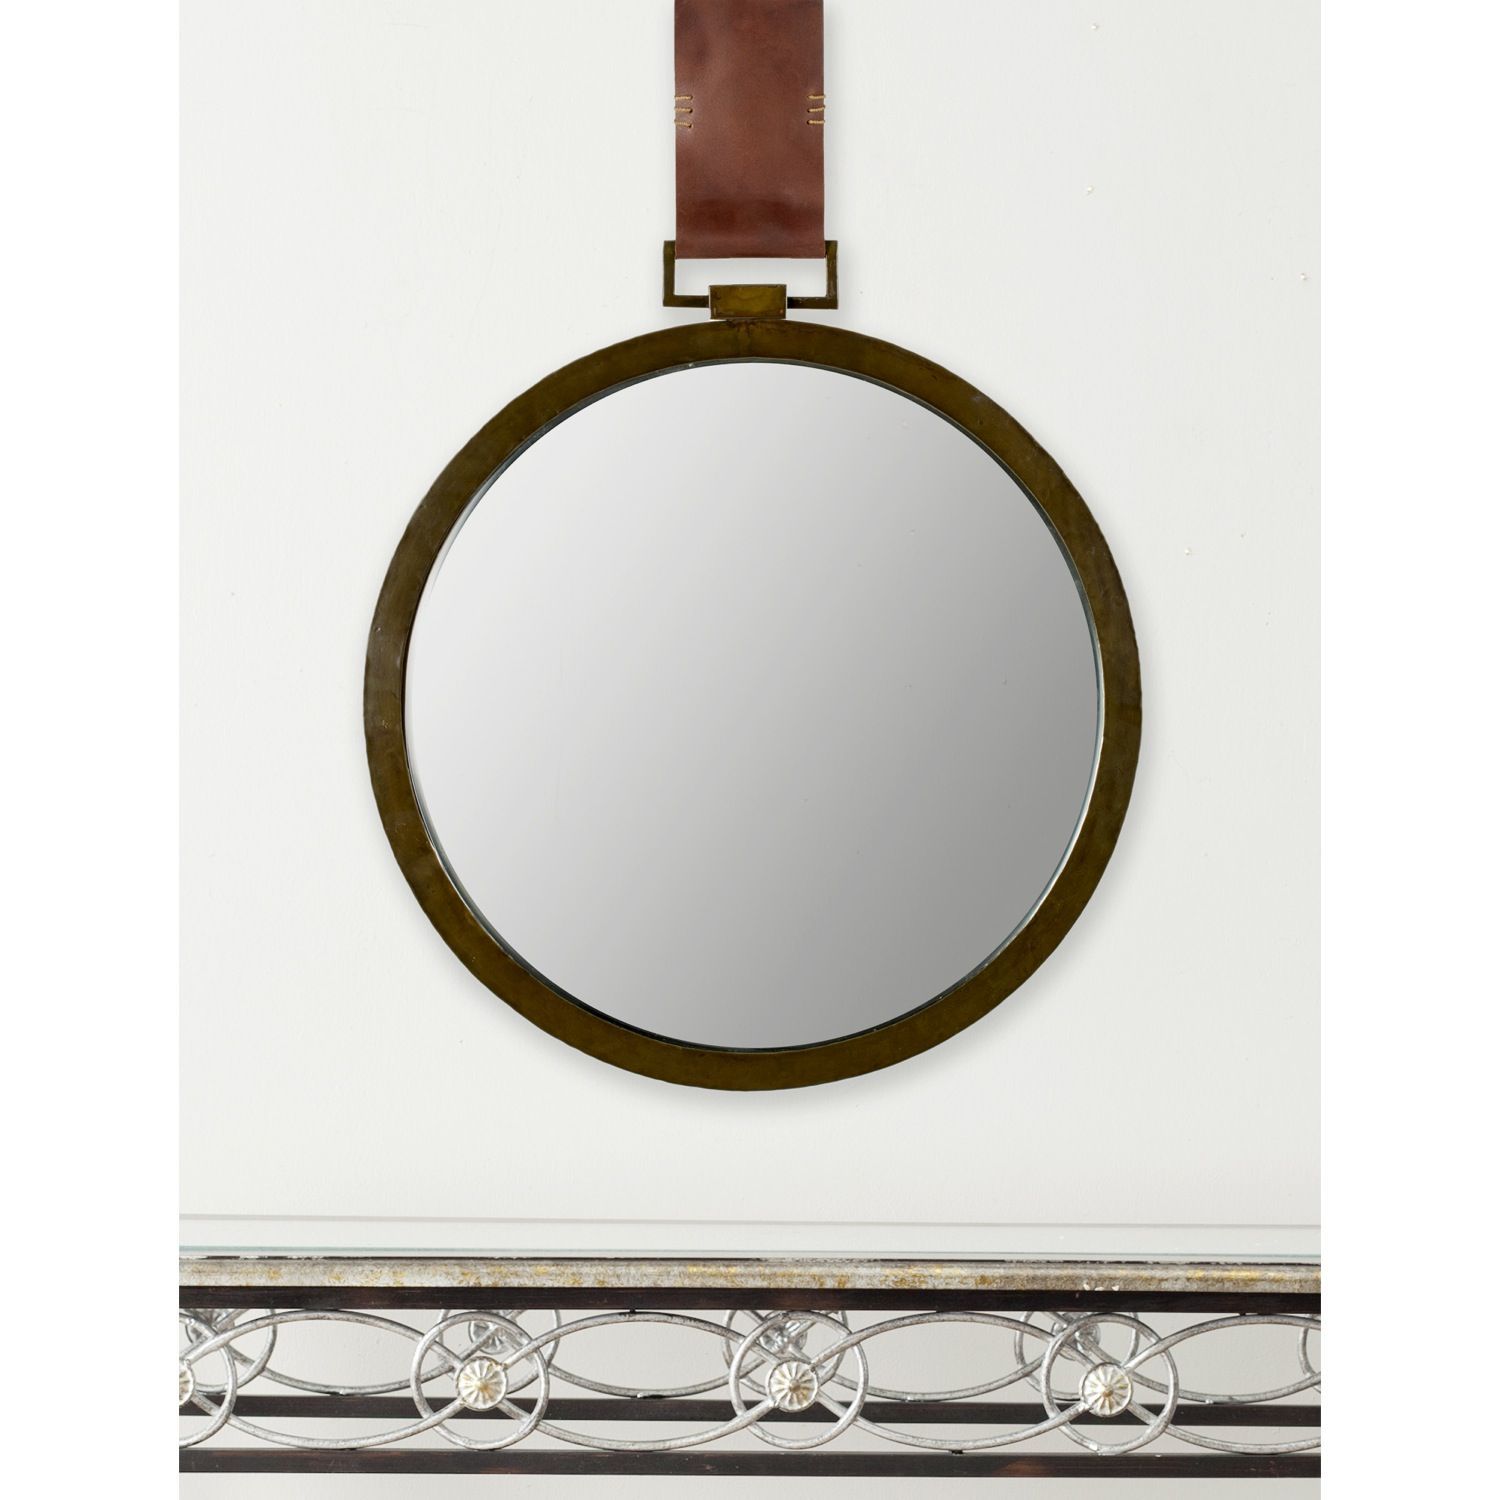 Mirrors | Mirrors With Leather Straps, Round Mirror Decor, Mirror Frames Intended For Brown Leather Round Wall Mirrors (View 2 of 15)